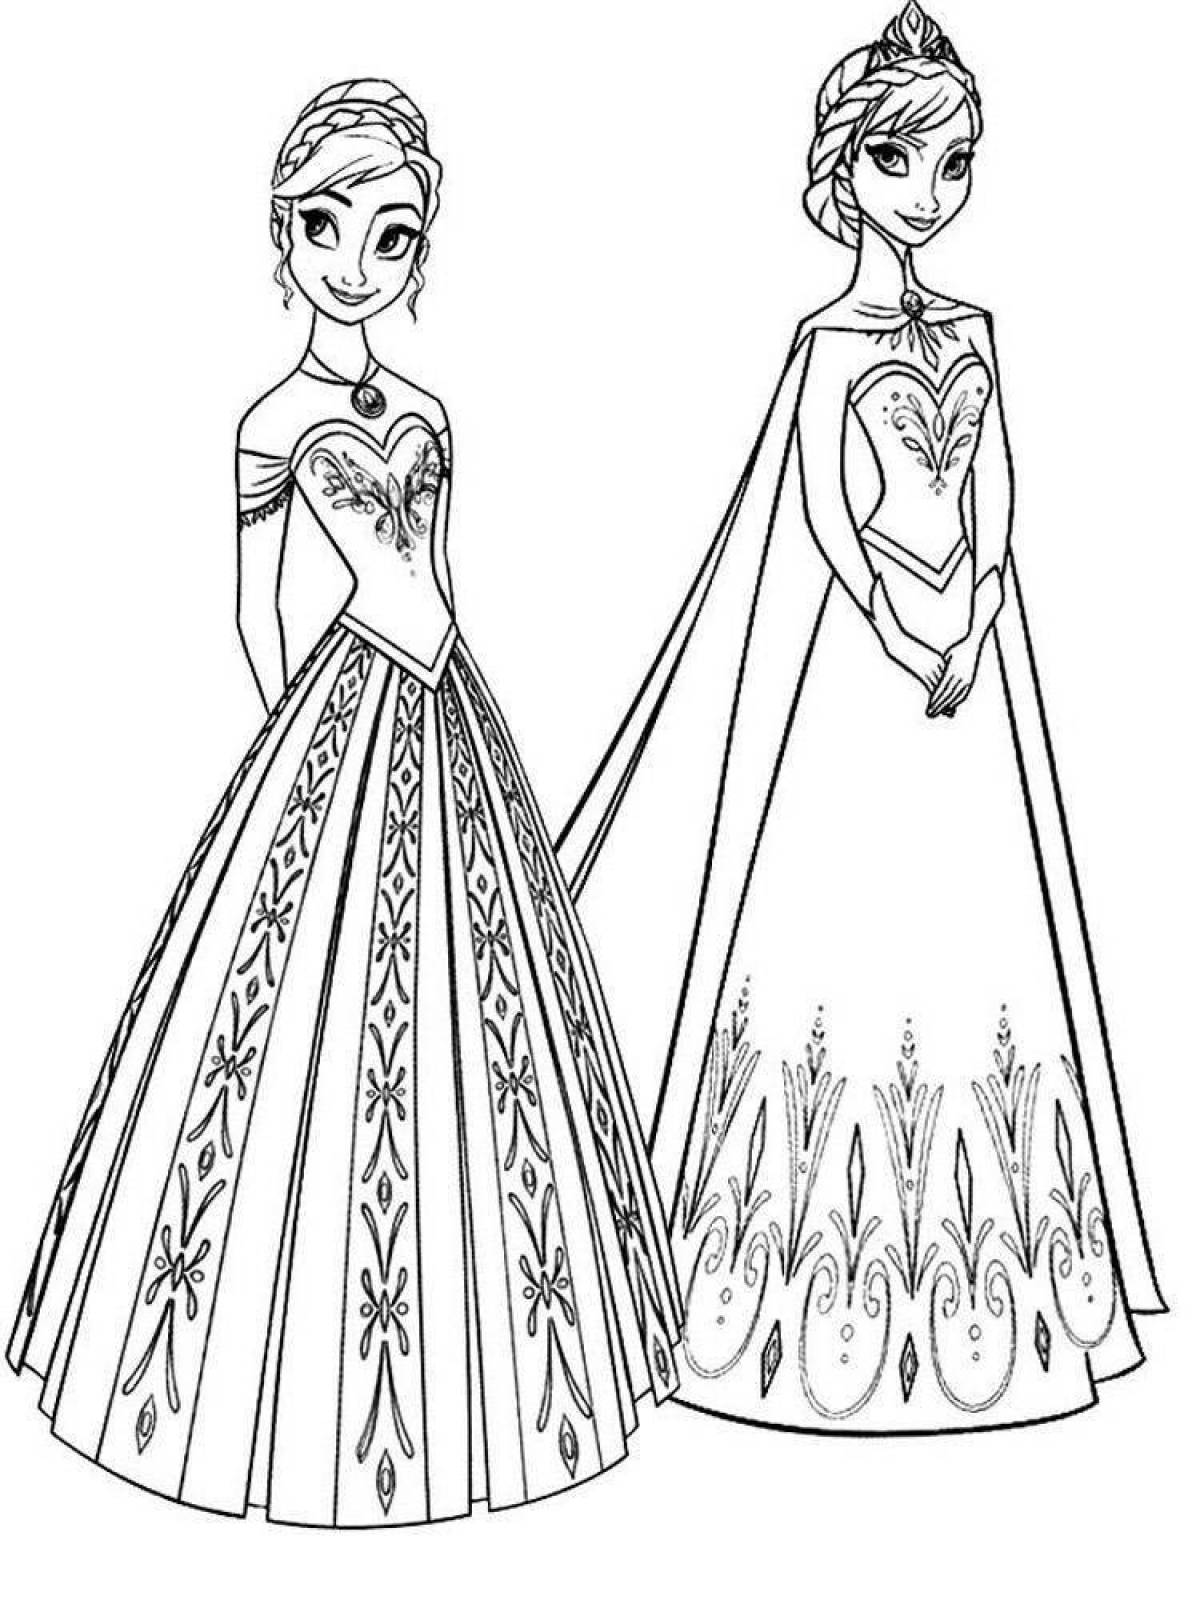 Charming coloring book for girls elsa and anna